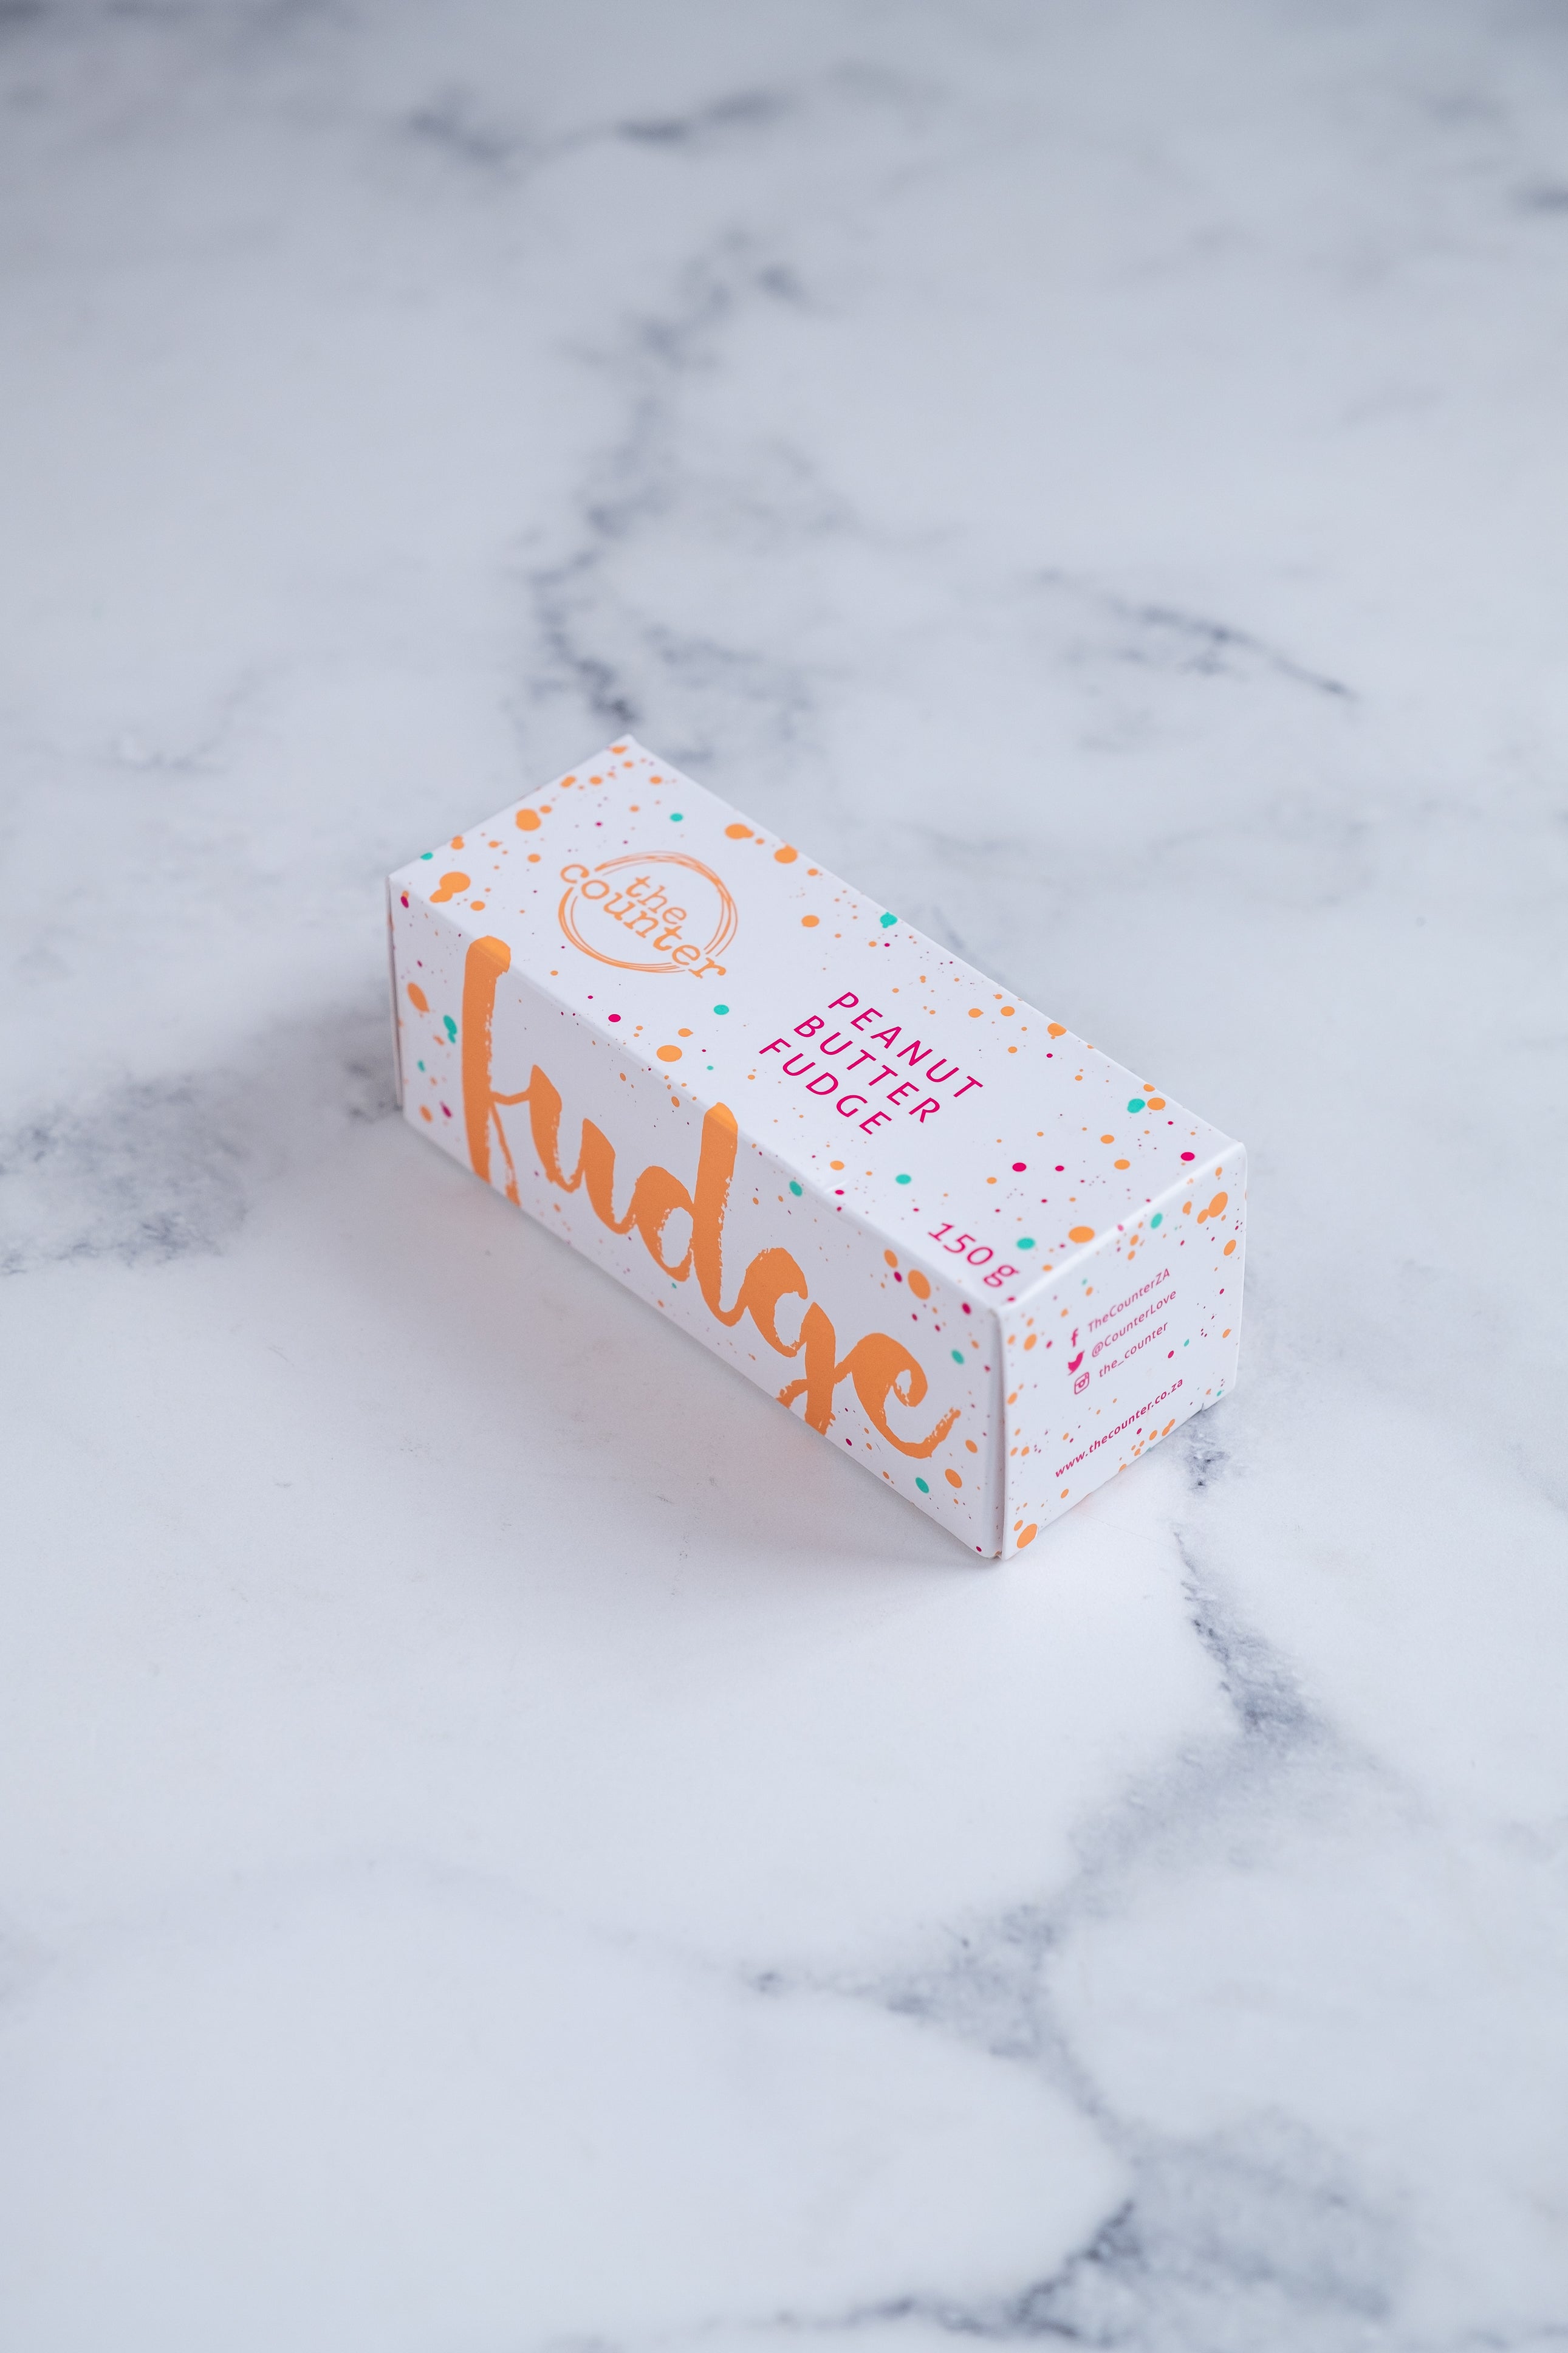 A white box sits on a neutral background. Paint splashes in orange and pink surround a messy circled logo for The Counter and the words ‘Peanut Butter Fudge' and 'Fudge' are written on different sides of the box in cerise pink block lettering.